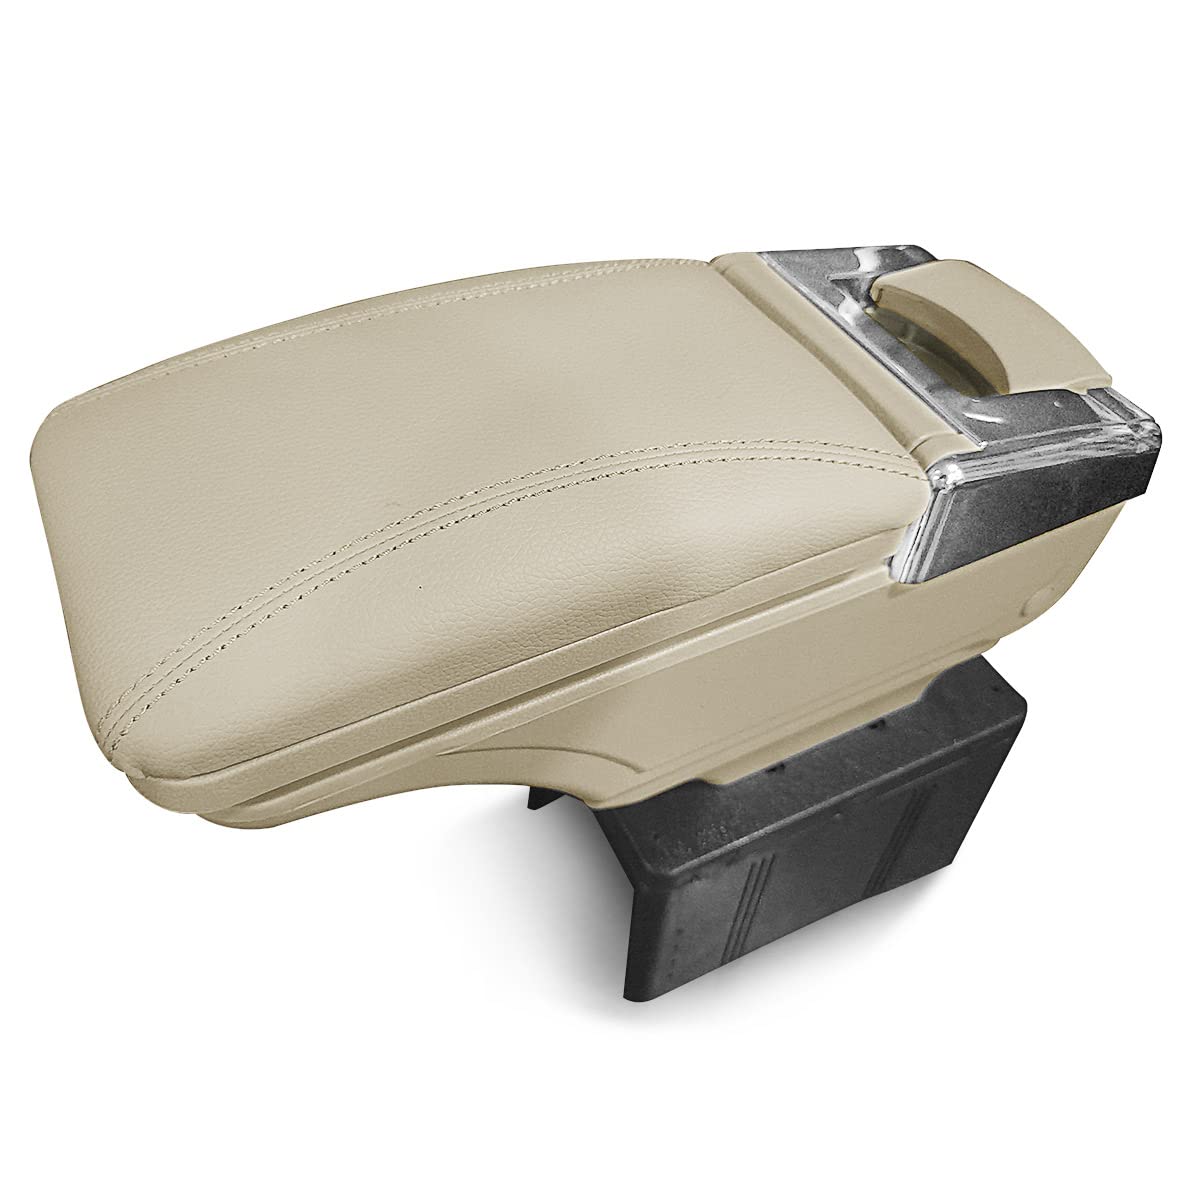 Oshotto PU Leather AR-01 Car Armrest Console Box For All Cars - Beige